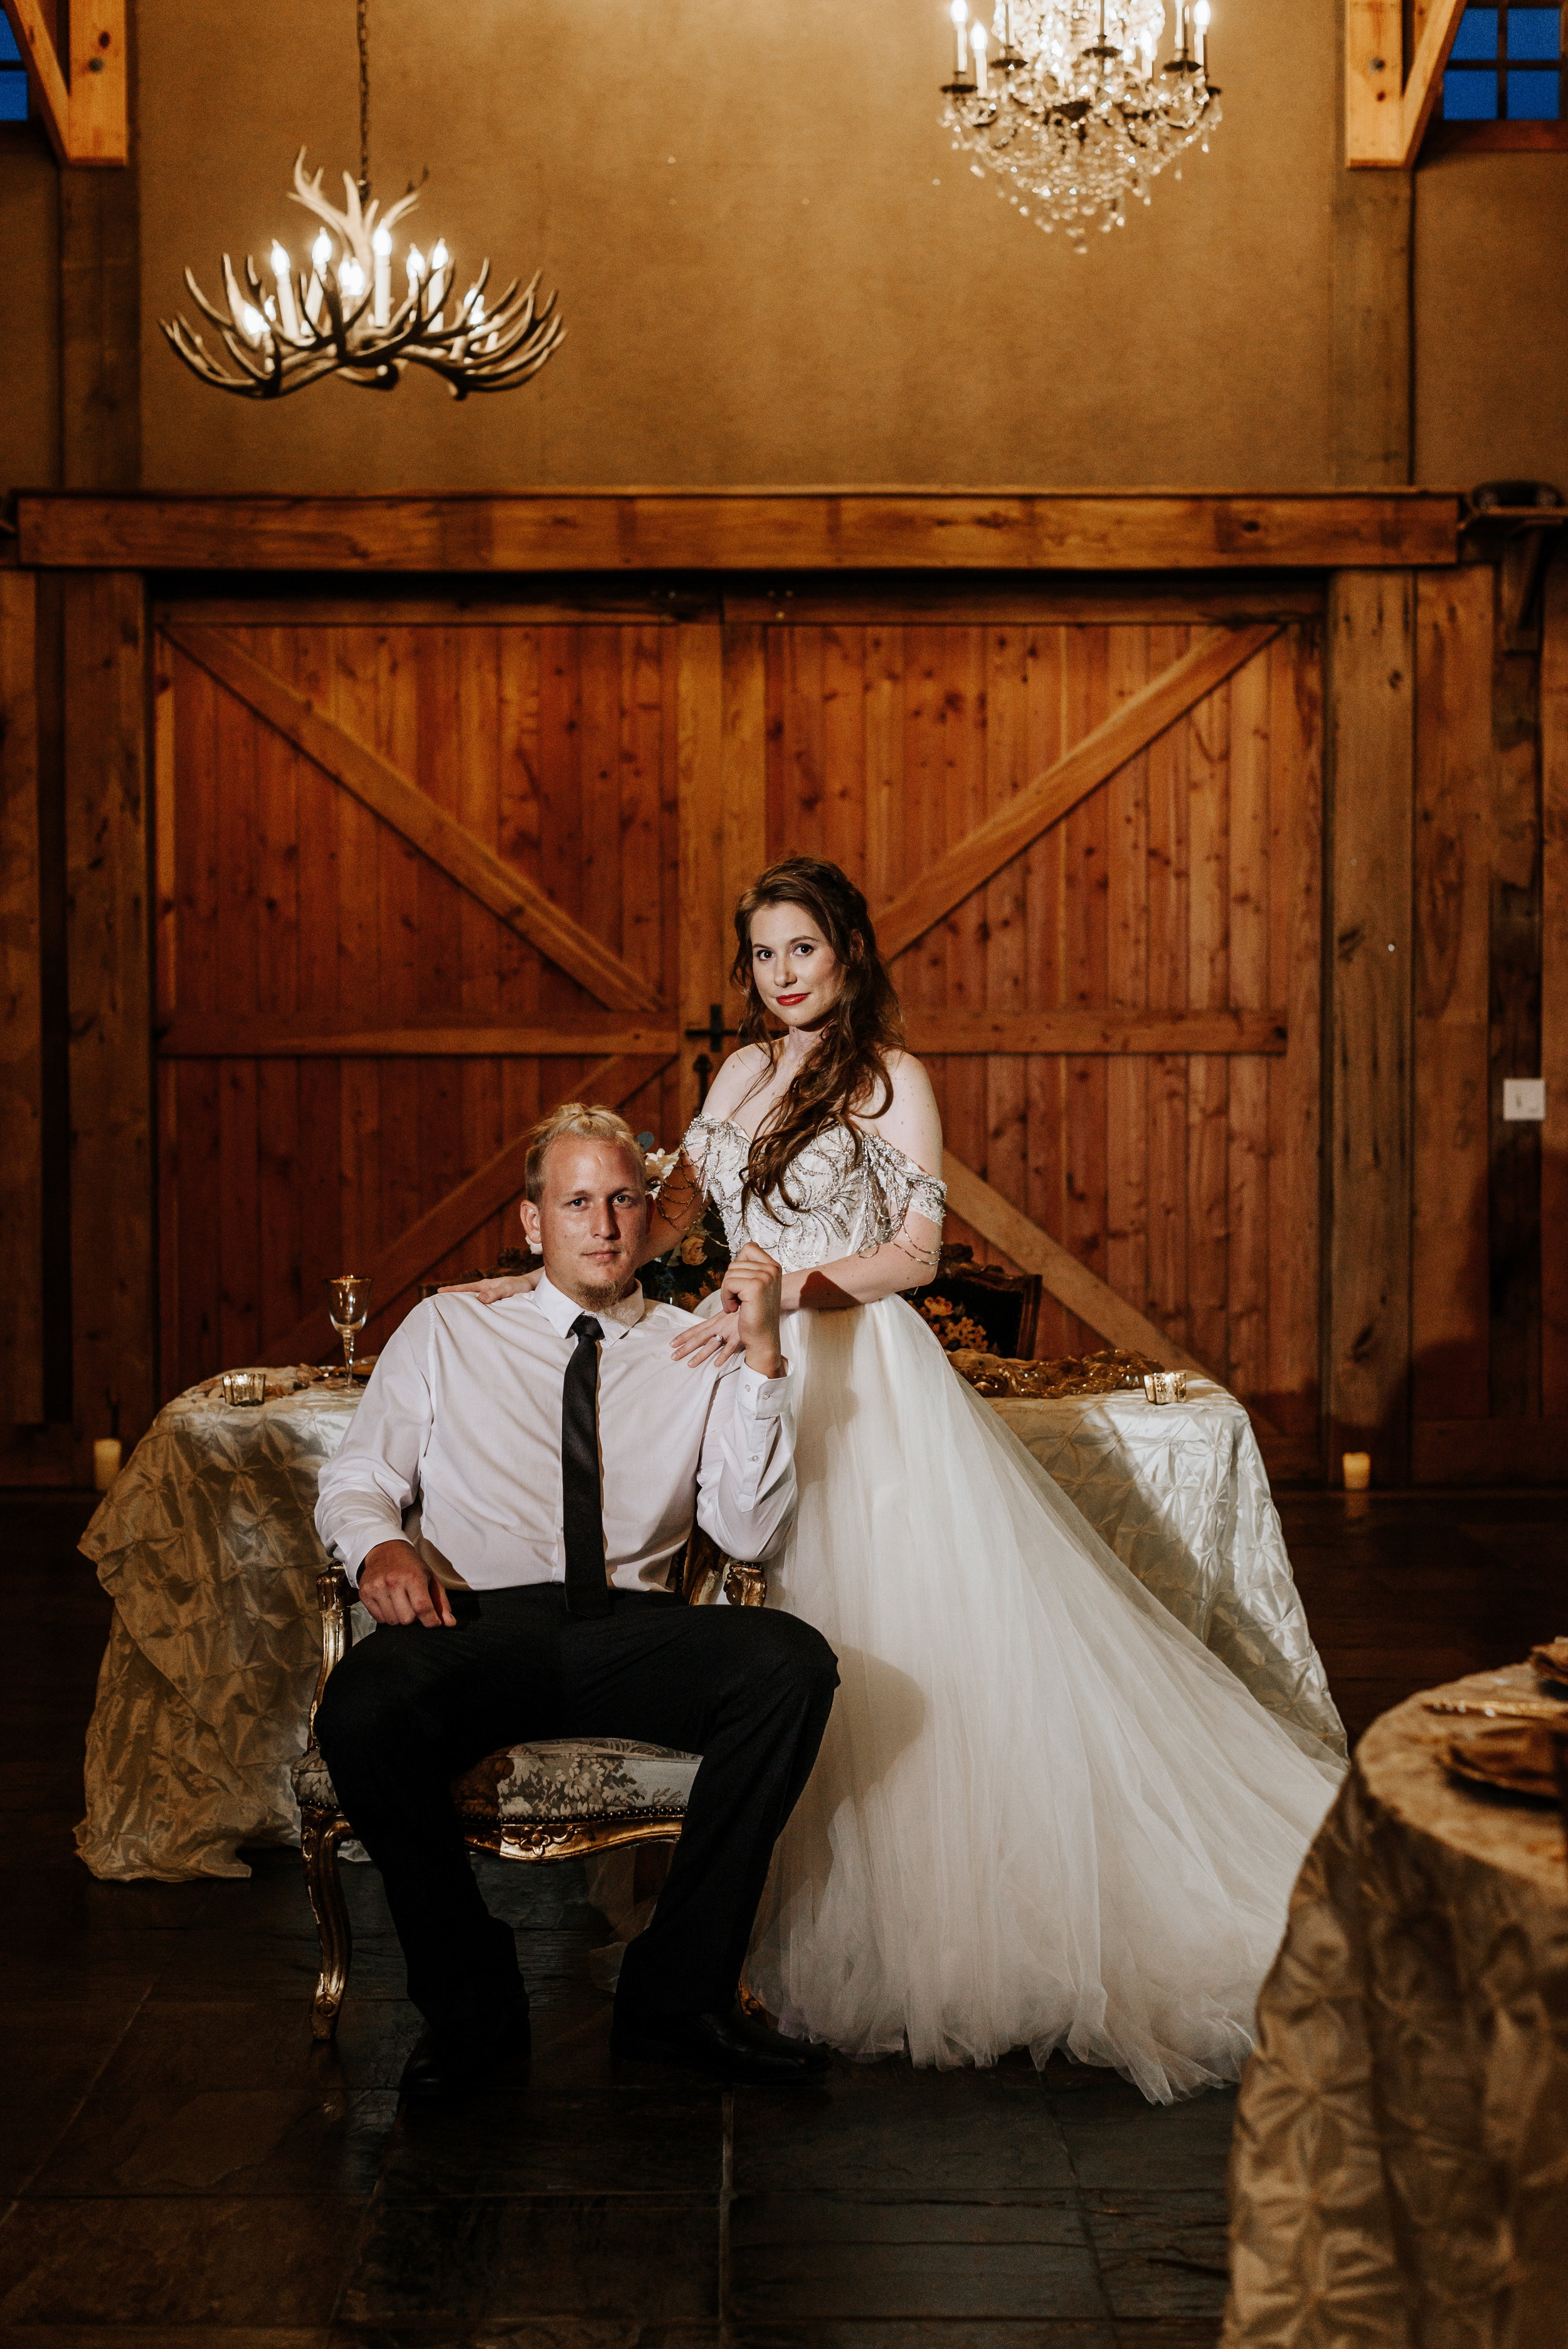 Grant-Station-Styled-Shoot-Whimsical-Moody-Fairytale-Wedding-Photography-by-V-3065.jpg